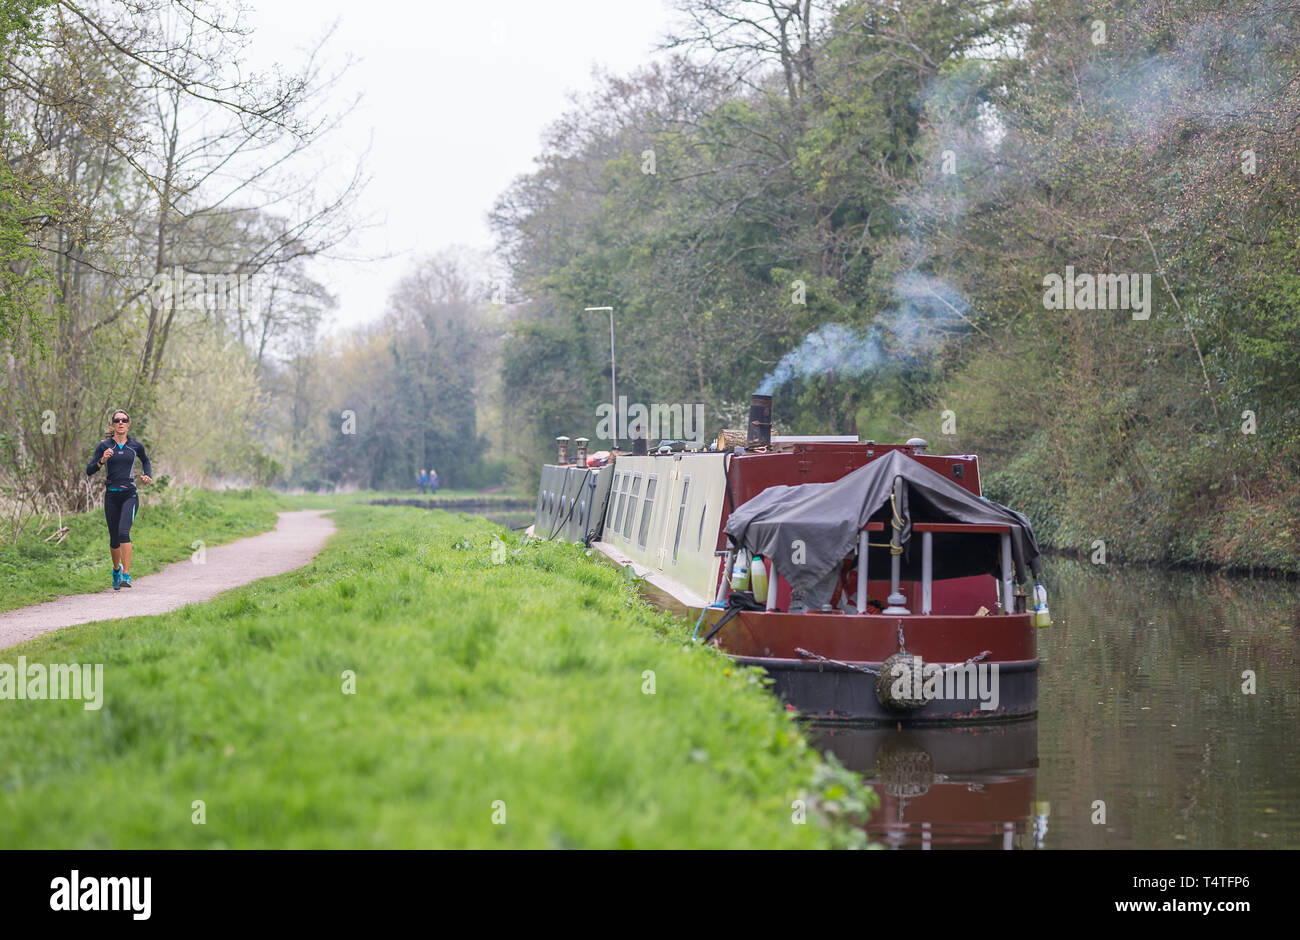 Narrowboat with smoking chimney moored alongside UK canal with female runner (front view) jogging along canal towpath. Stock Photo